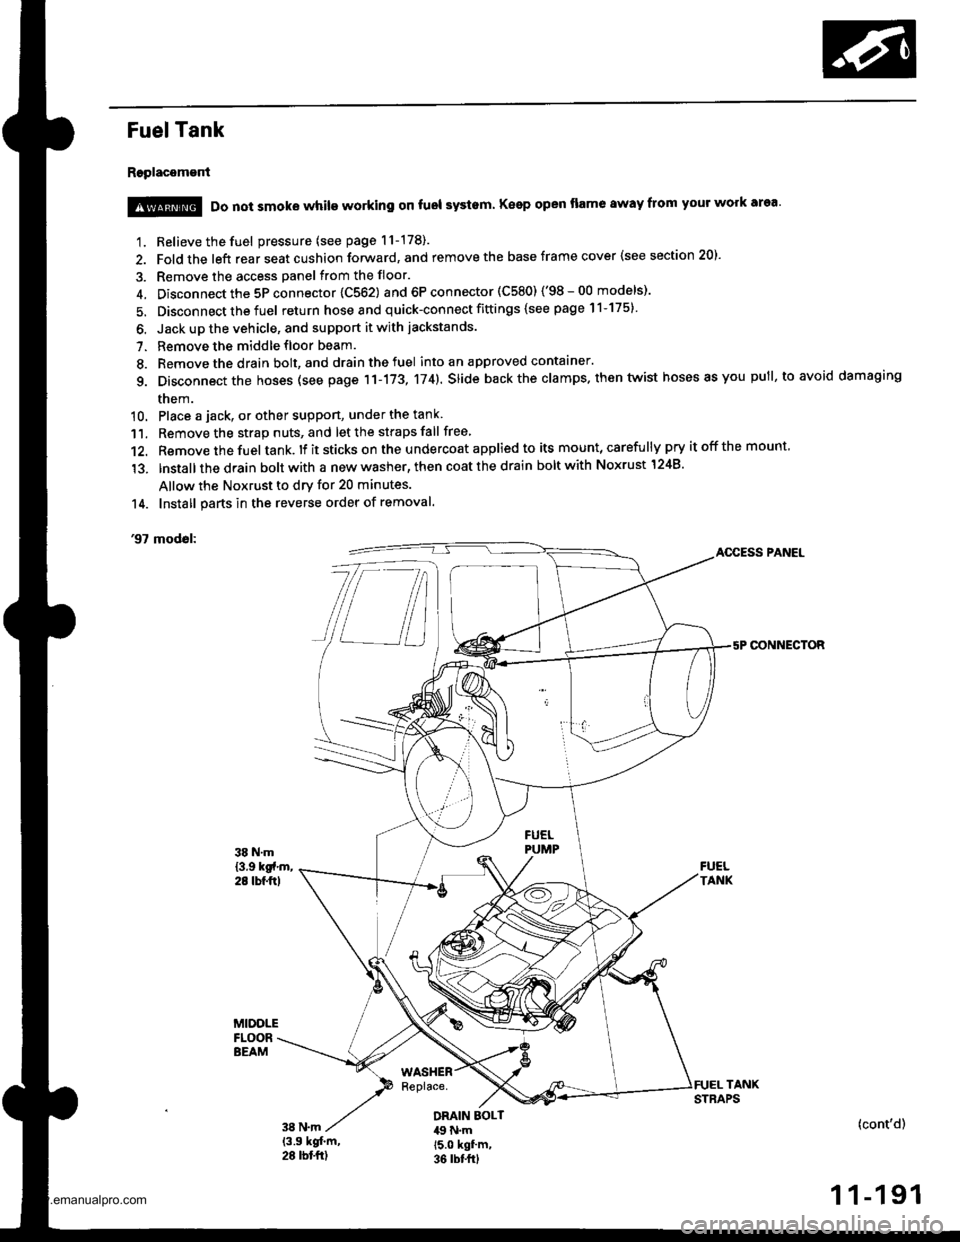 HONDA CR-V 1997 RD1-RD3 / 1.G Workshop Manual 
Fuel Tank
Replacement
1. Relieve the fuel pressure (see page 11-178).
2. Fold the left rear seat cushion forward, and remove the base frame cover {see section 20).
3. Remove the access panel from the